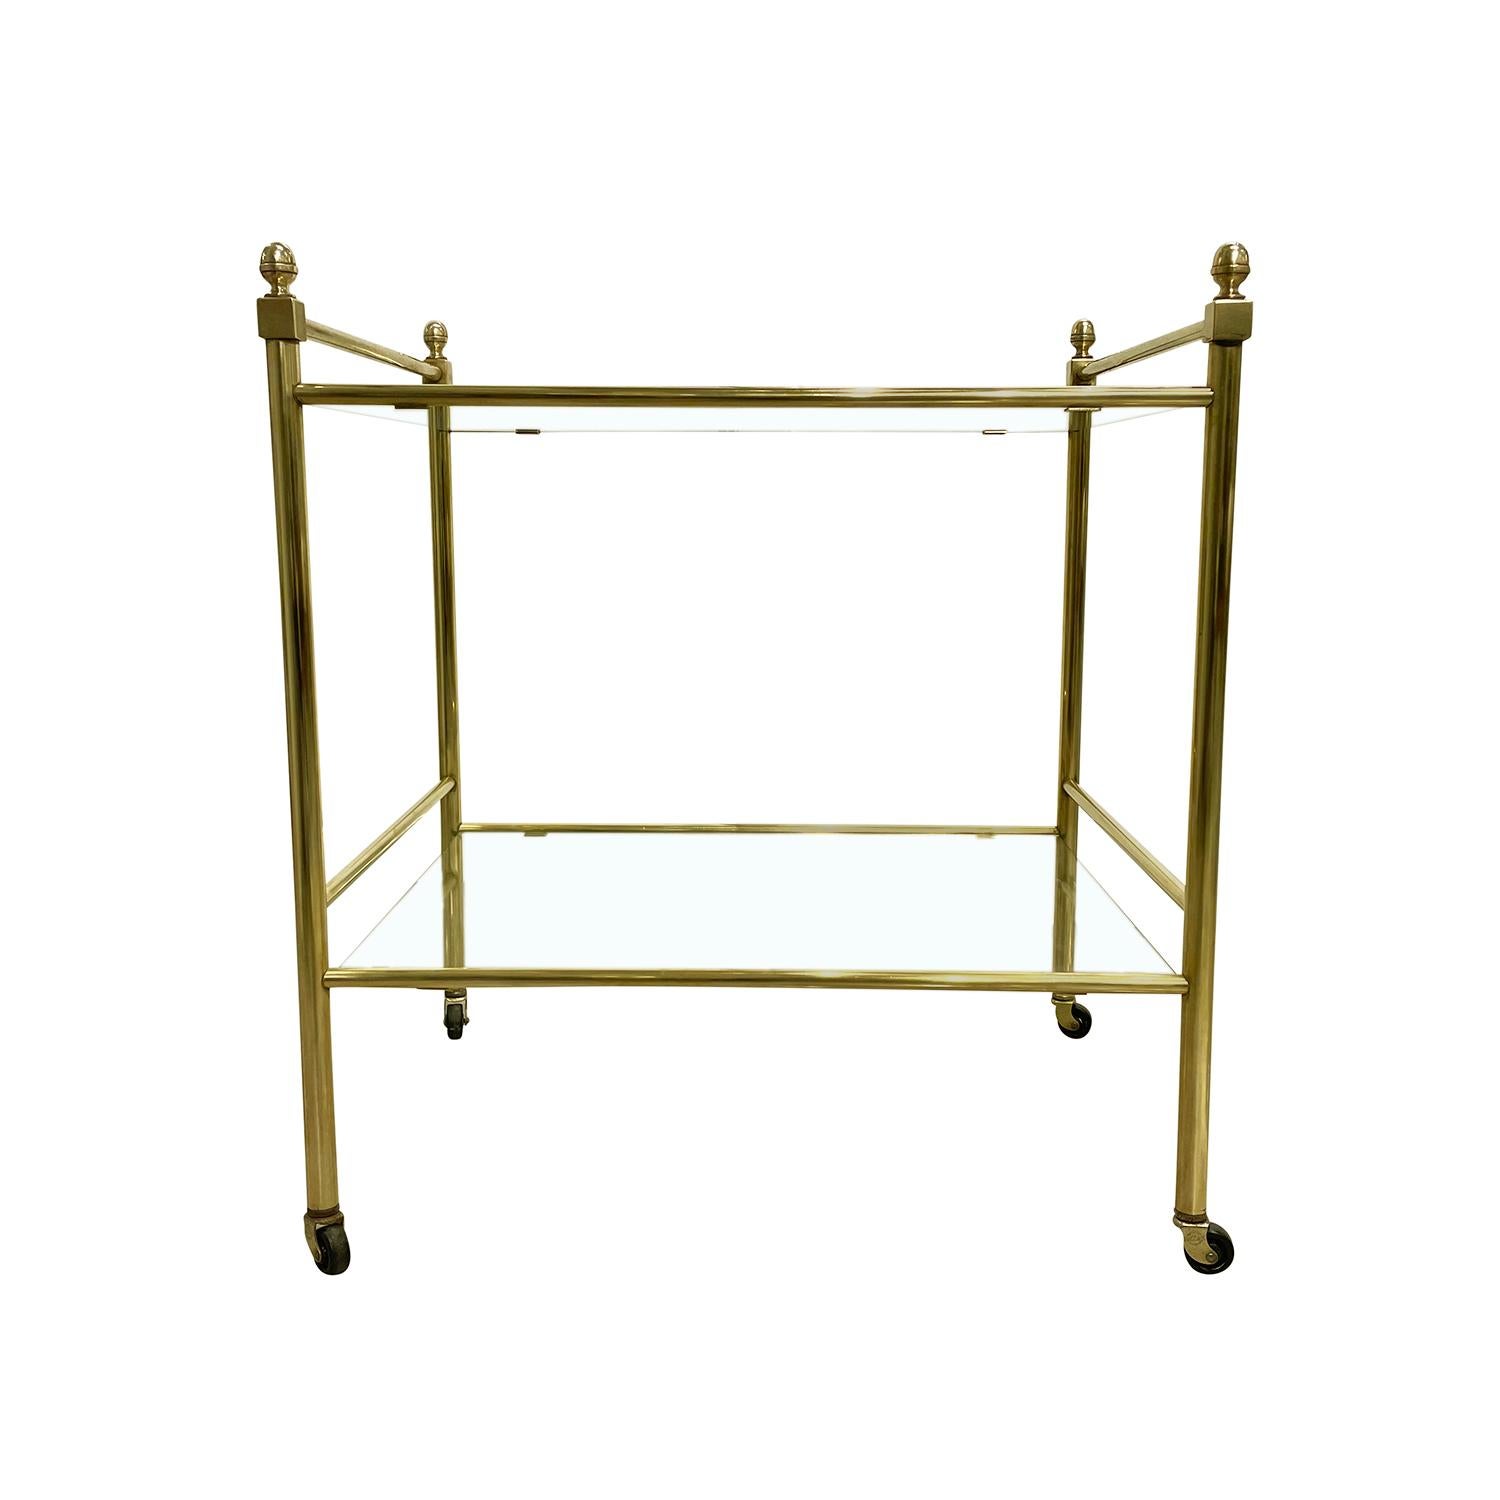 A vintage Mid-Century Modern Italian side, sofa table made of hand crafted brass, in good condition. The serving, tea table is composed with two tier glass tops, supported by four round legs, standing on small wheels. Wear consistent with age and